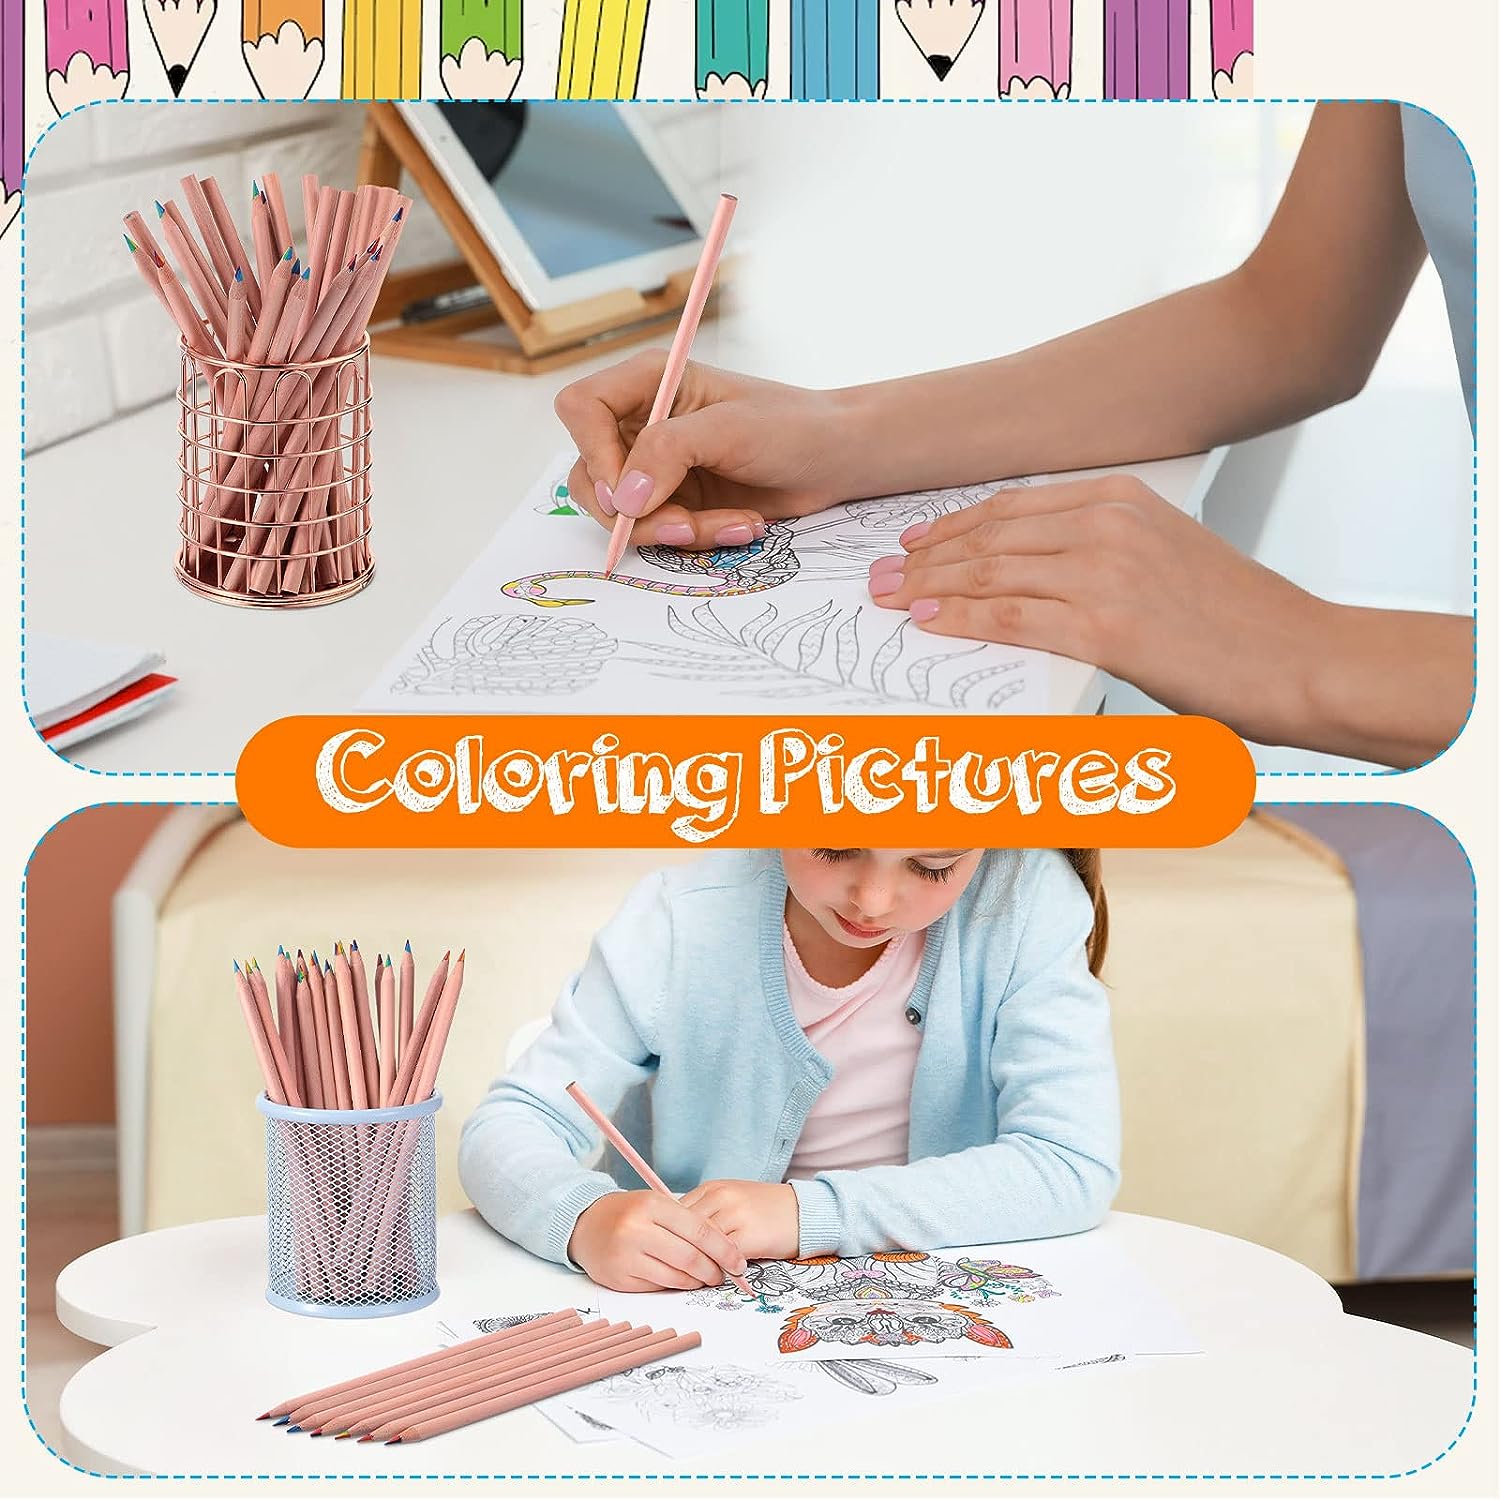 Artist in You: Coloring 101 With Woodless Coloring Pencils